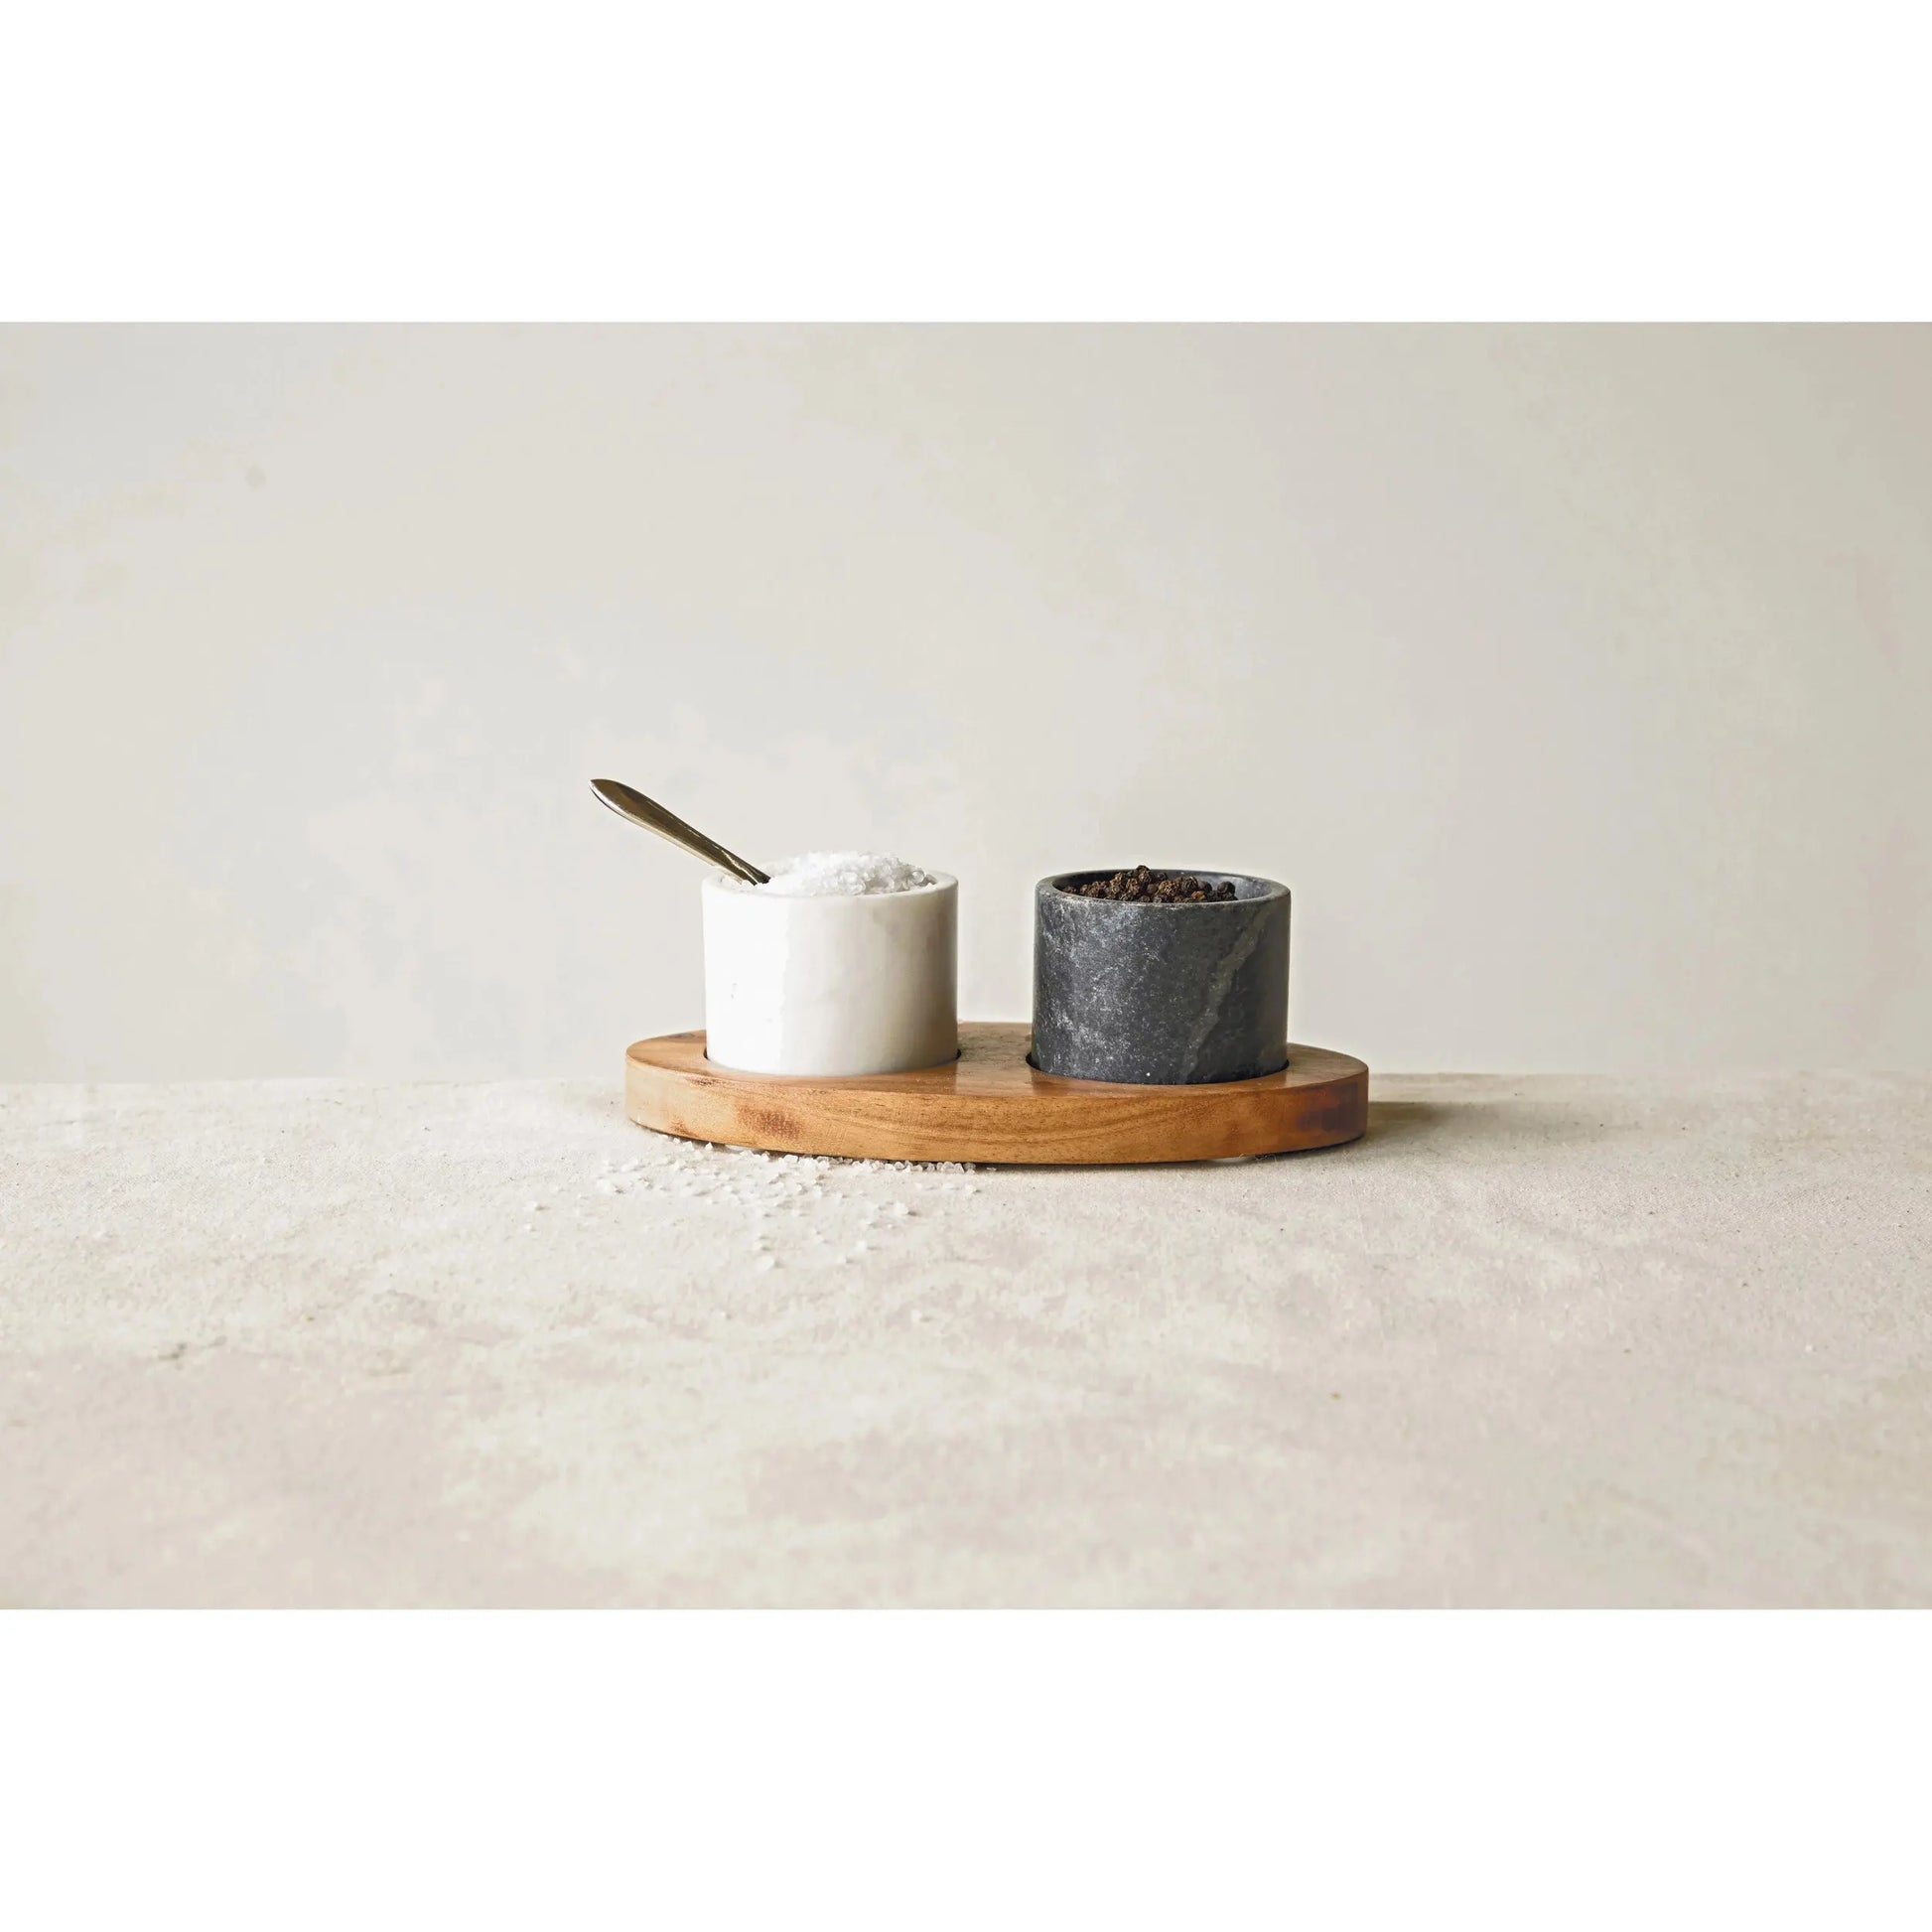 MANGO WOOD TRAY WITH MARBLE BOWLS/SPOON CREATIVE CO-OP